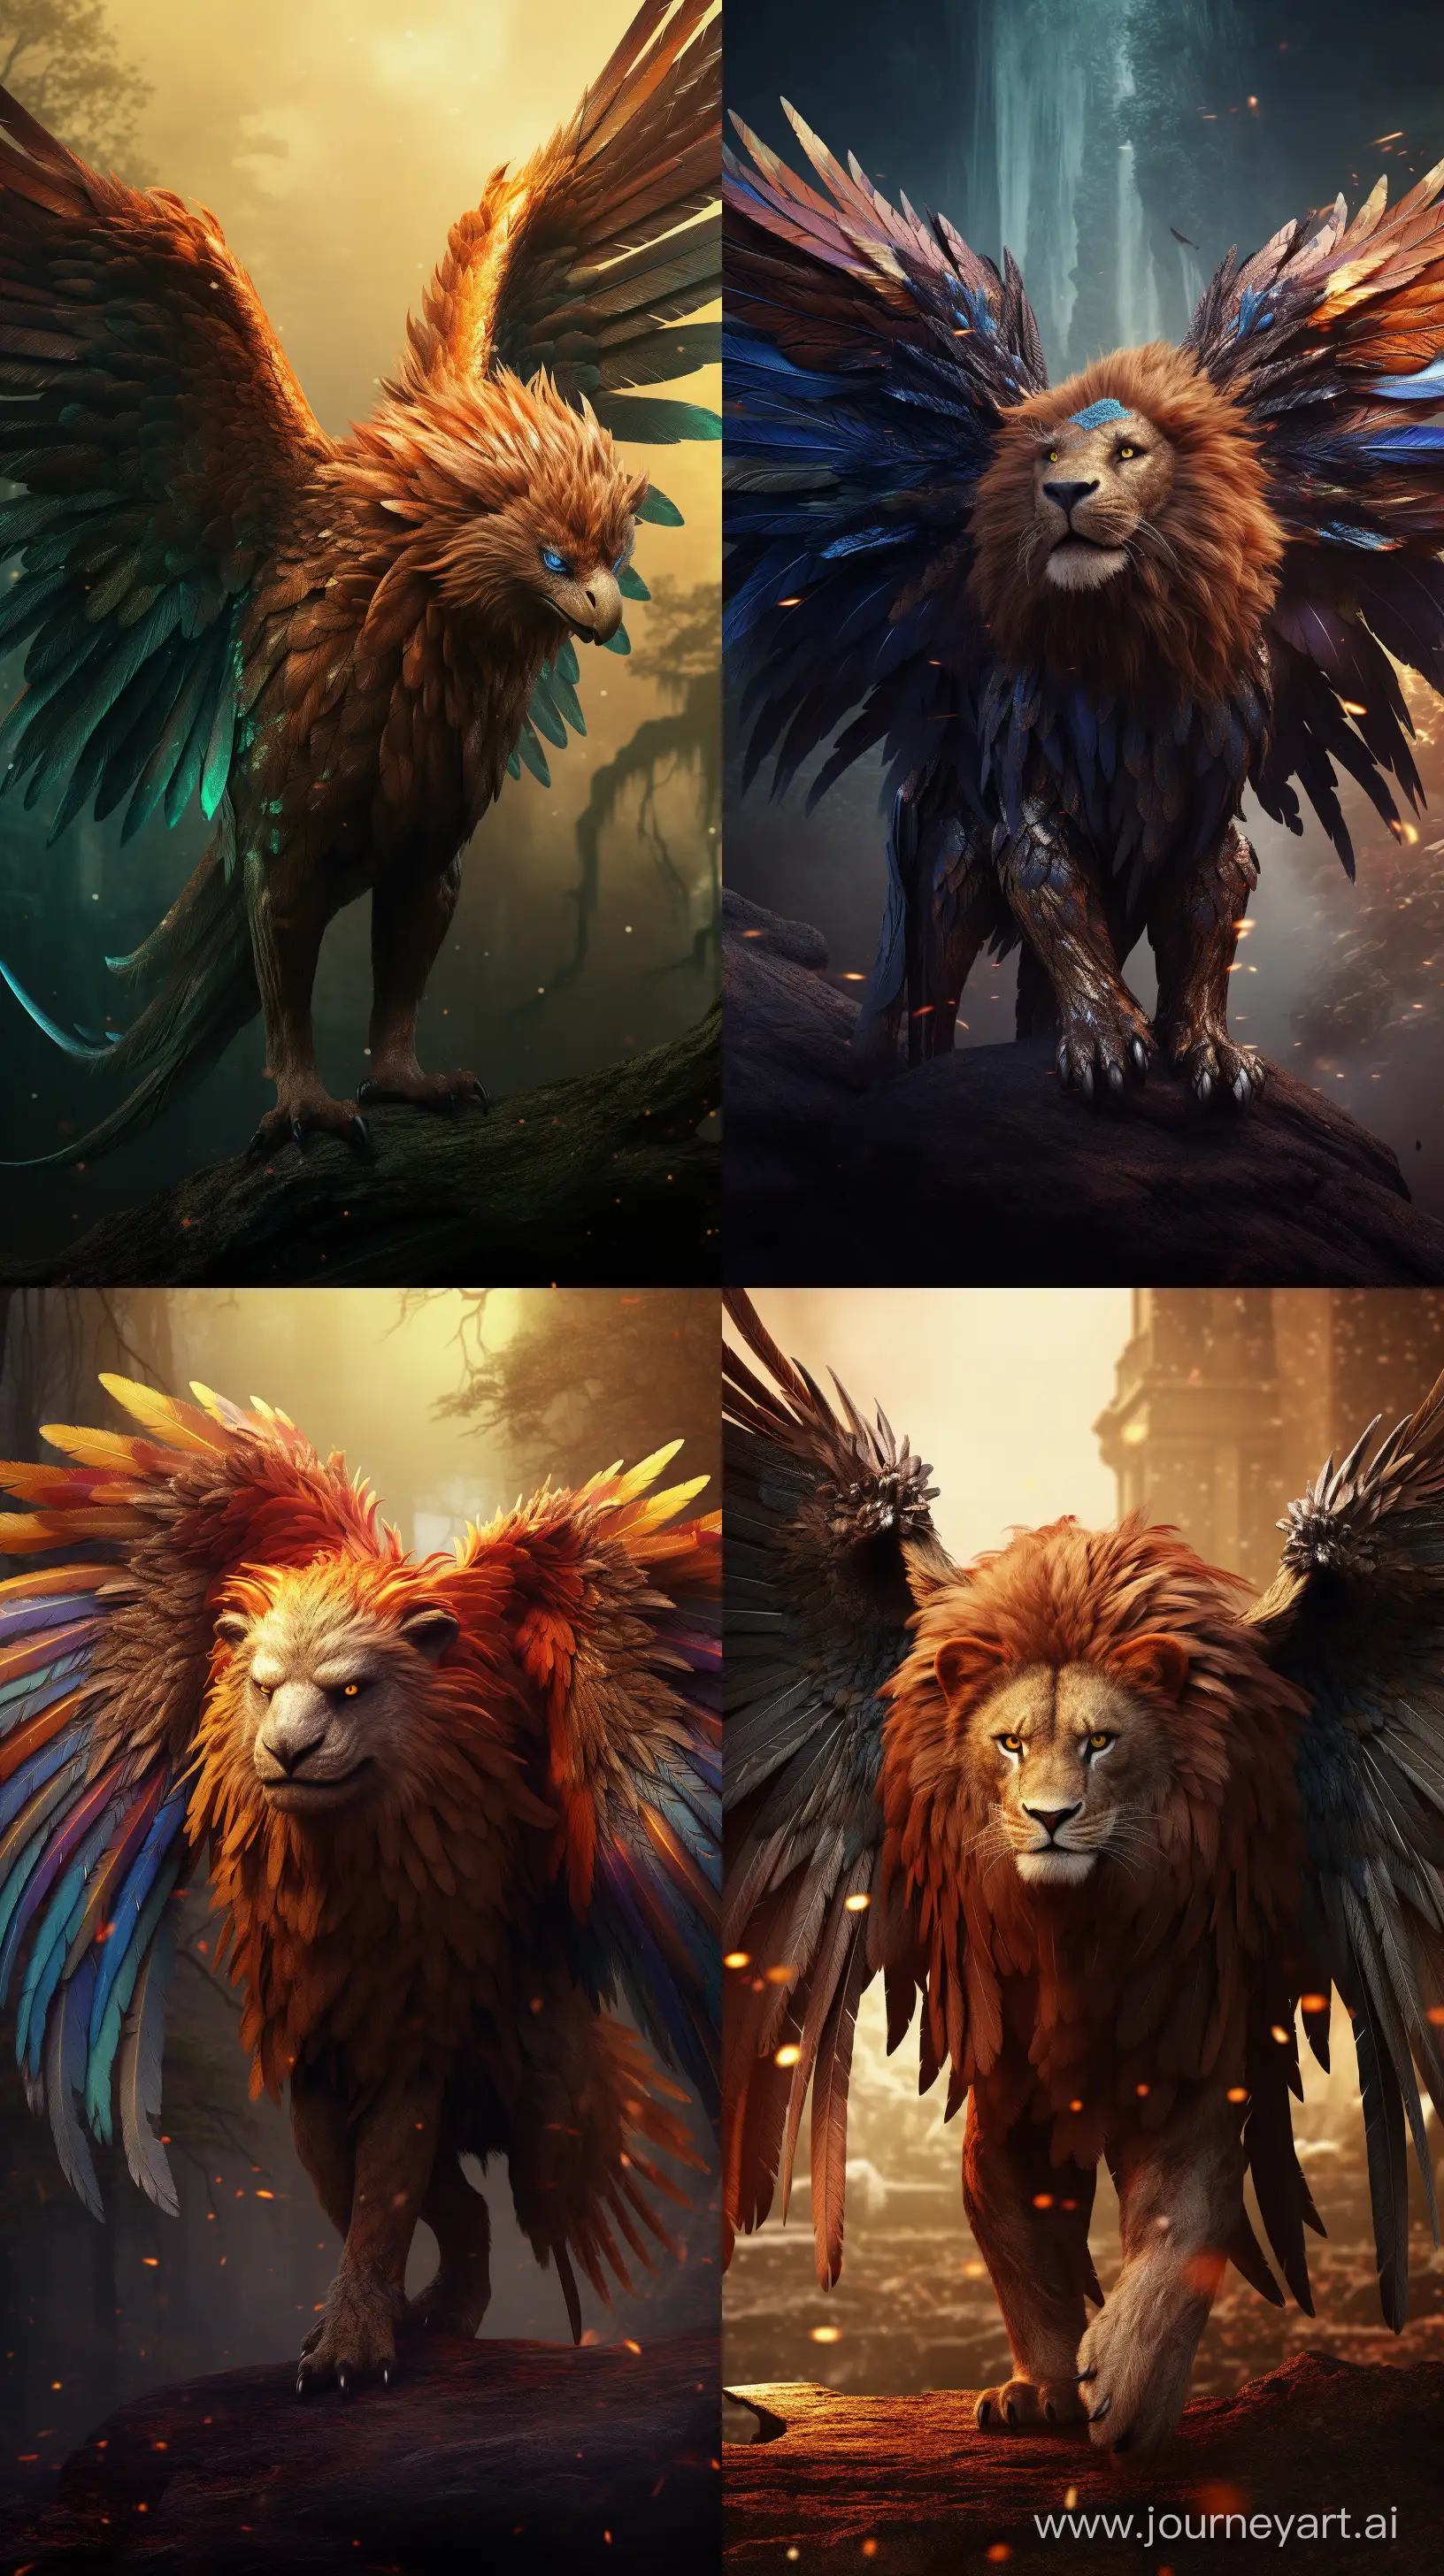 Majestic-Lion-with-Wings-Roaring-in-Dim-Ambient-Lighting